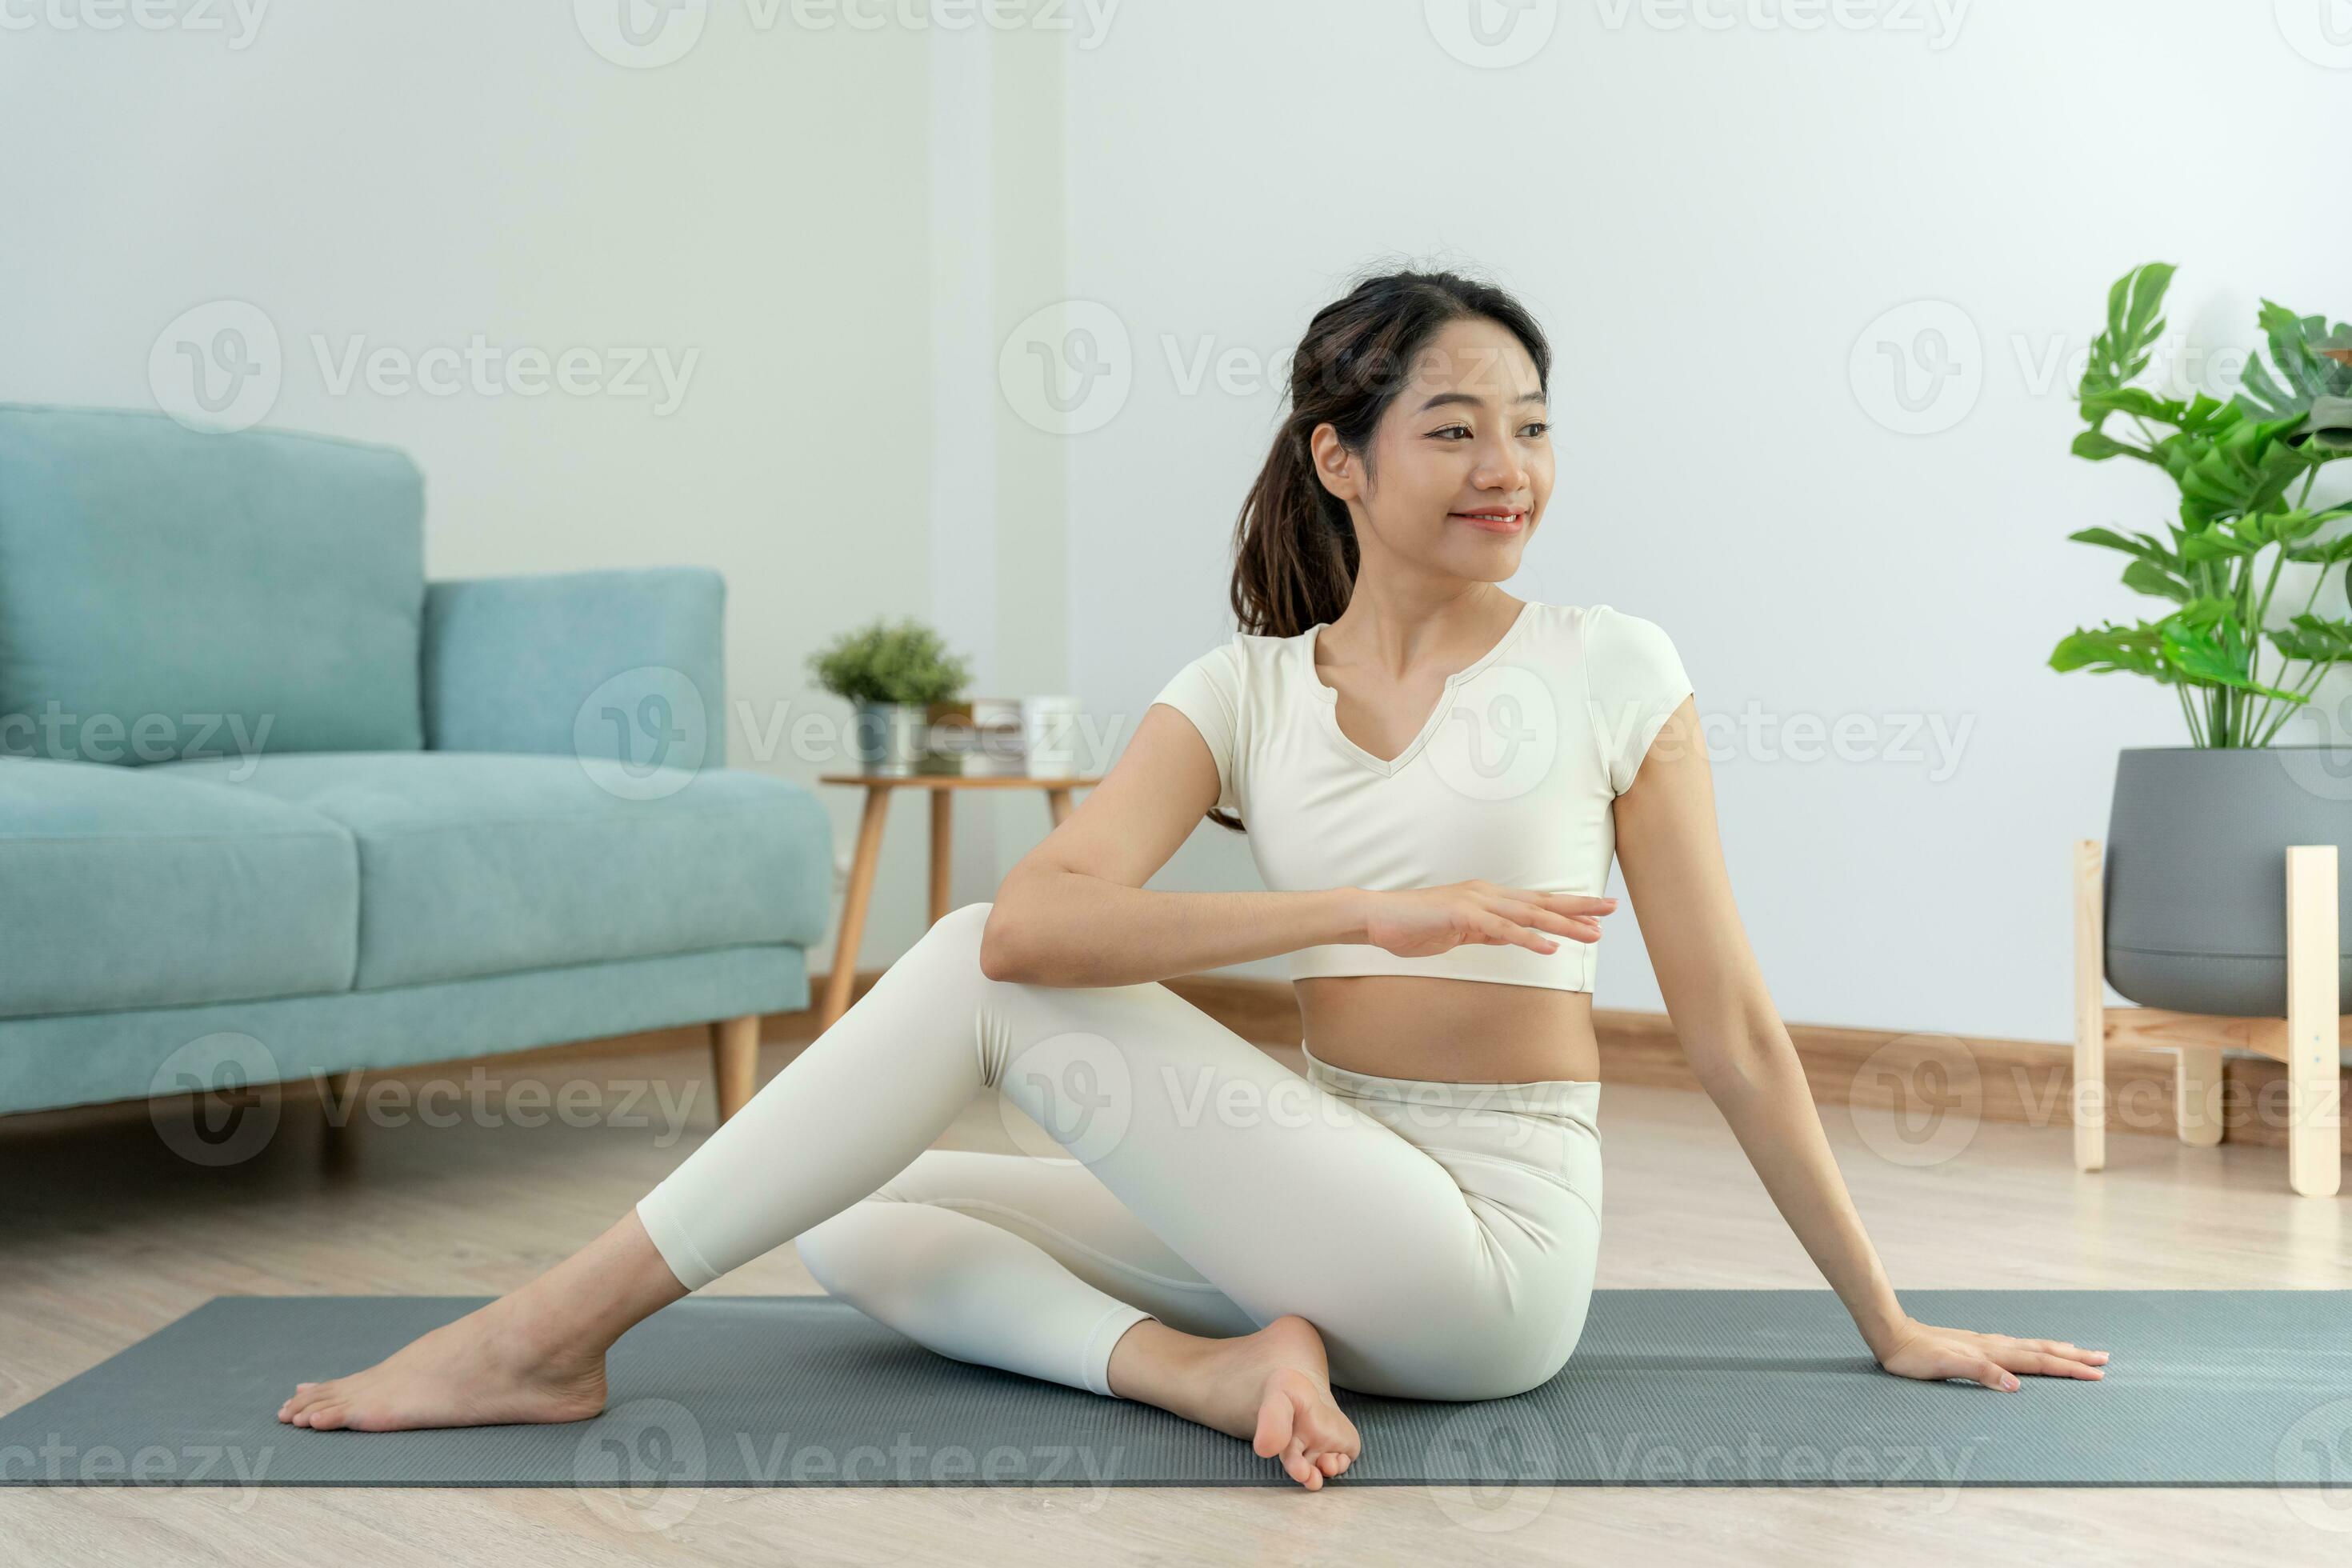 Premium Photo  Women asia practice yoga sitting posture, meditation,  stretching at the indoor gym for good health at sunset. side view image.  fitness ,workout, gym exercise ,lifestyle and healthy concept.